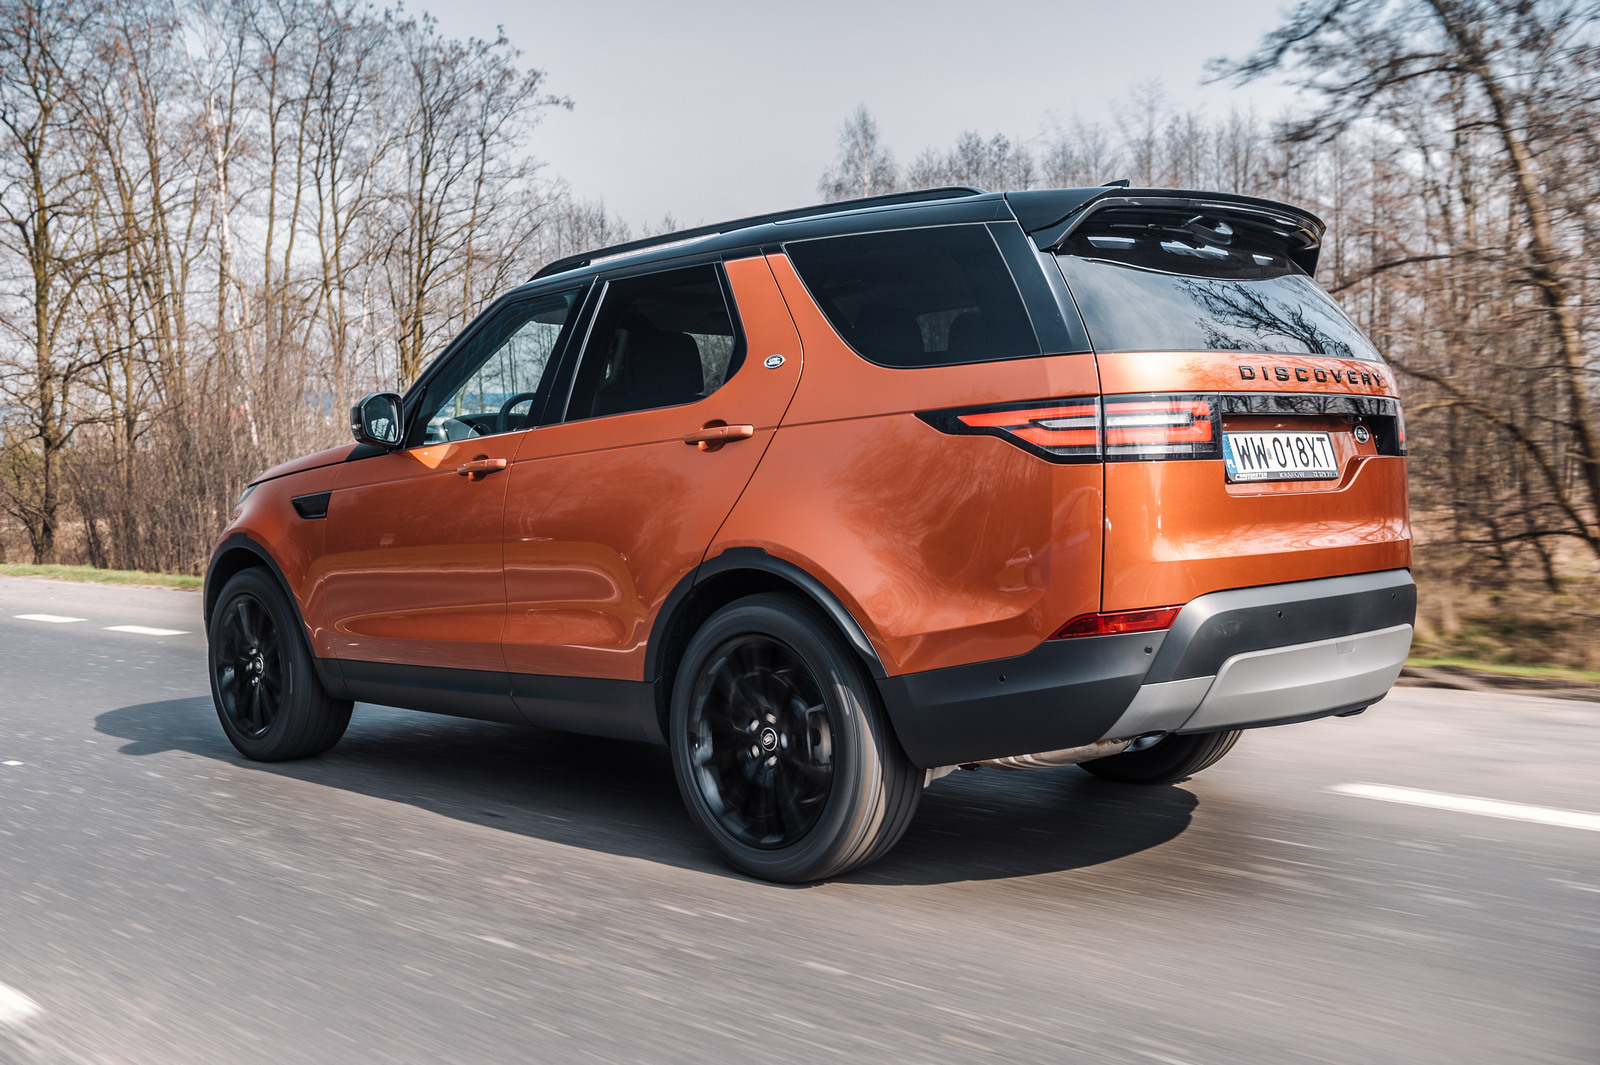 Nowy Land Rover Discovery (2017) TEST i OPINIA Dane